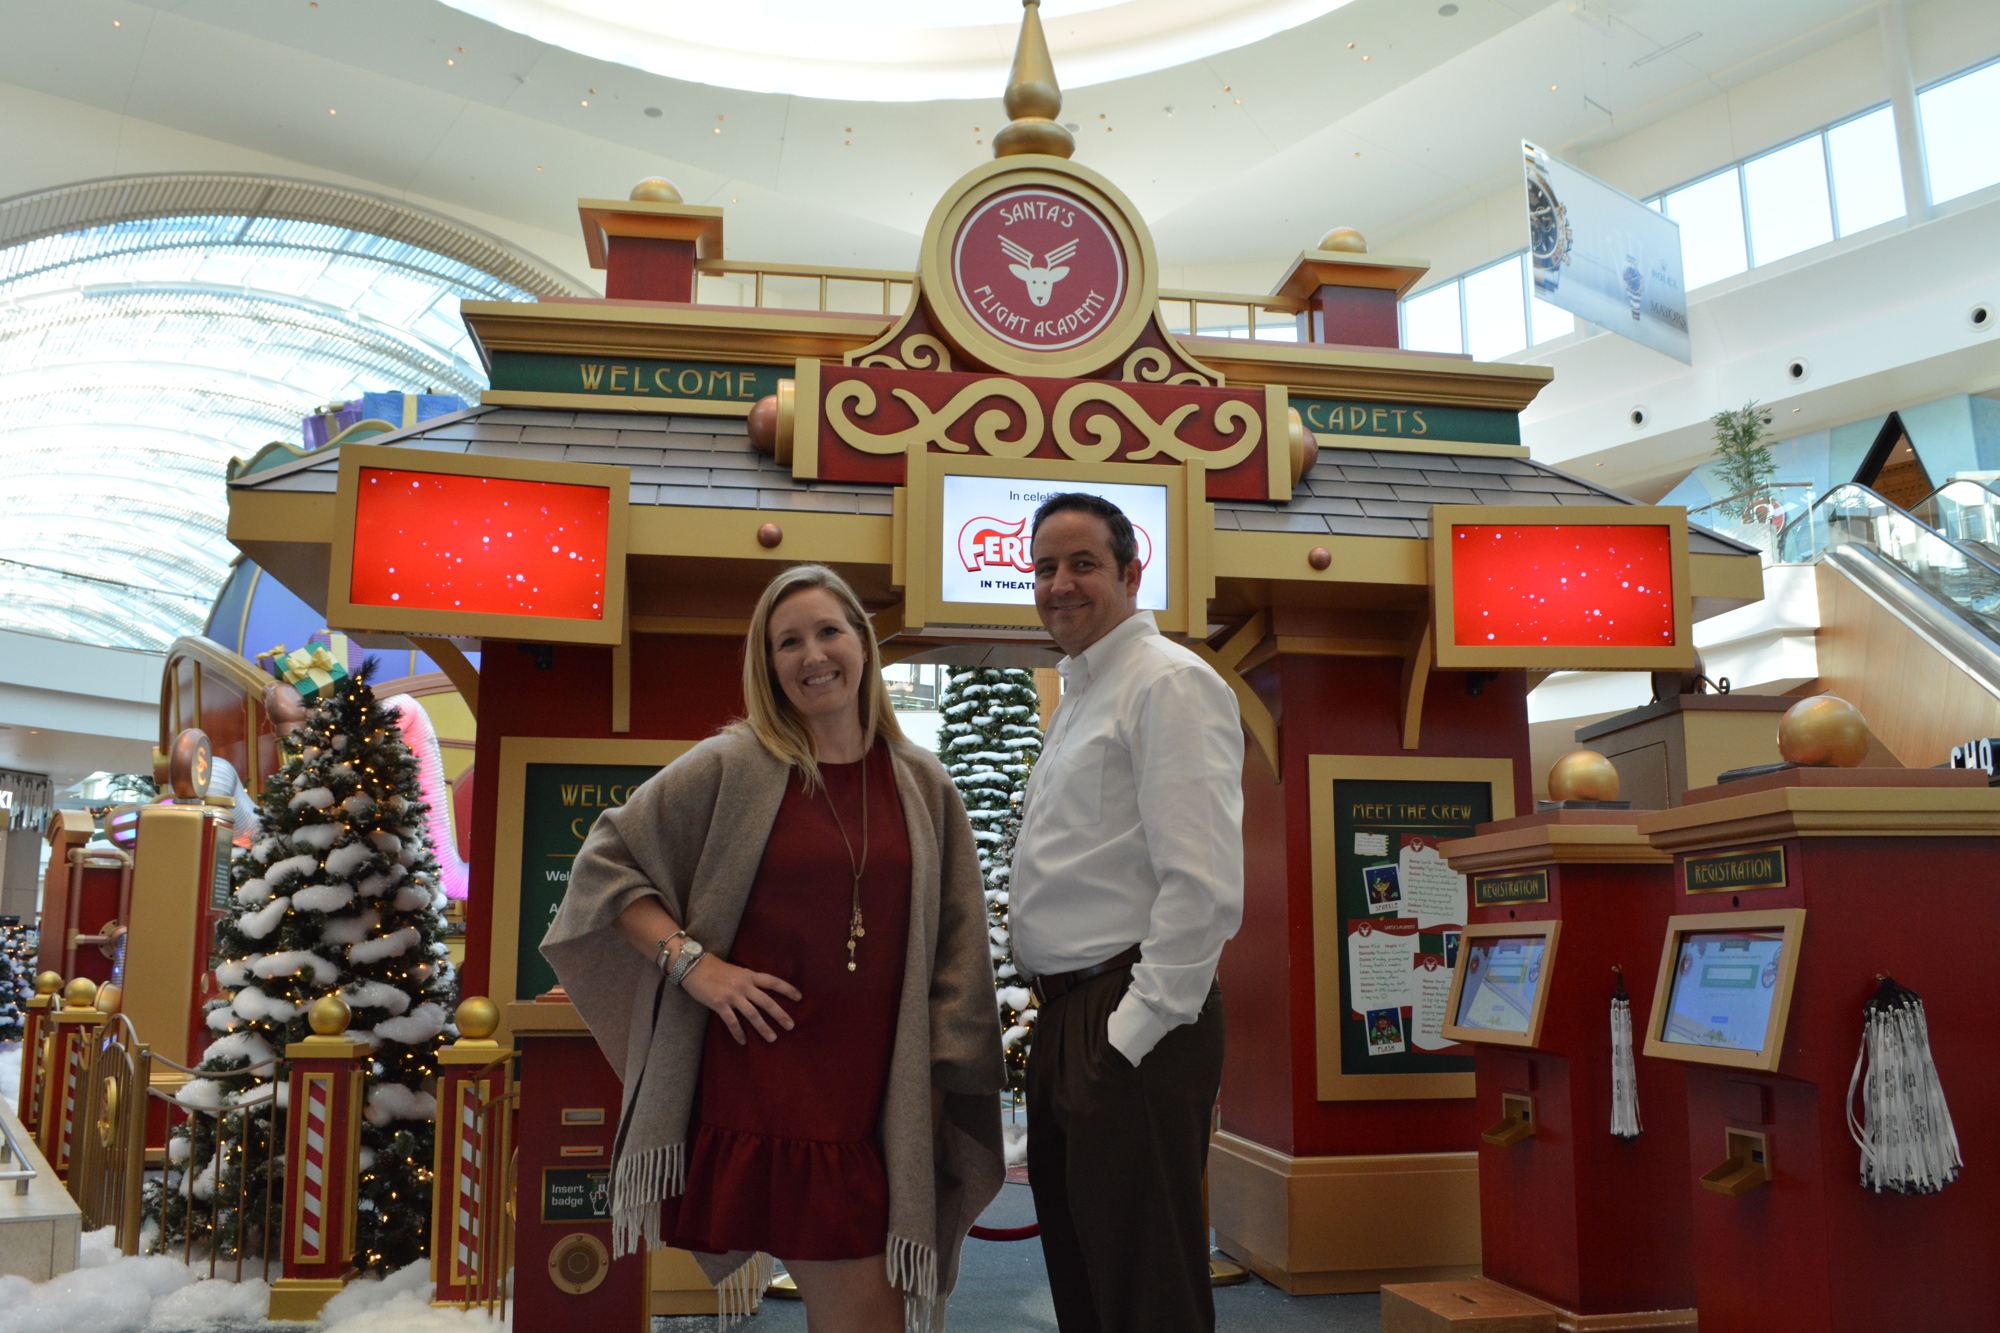 The Mall at University Town Center Marketing Director Lauren Clark and General Manager Jeramy Burkinshaw hope the additions, such as snow, to the mall bring an element of delight to holiday shoppers.